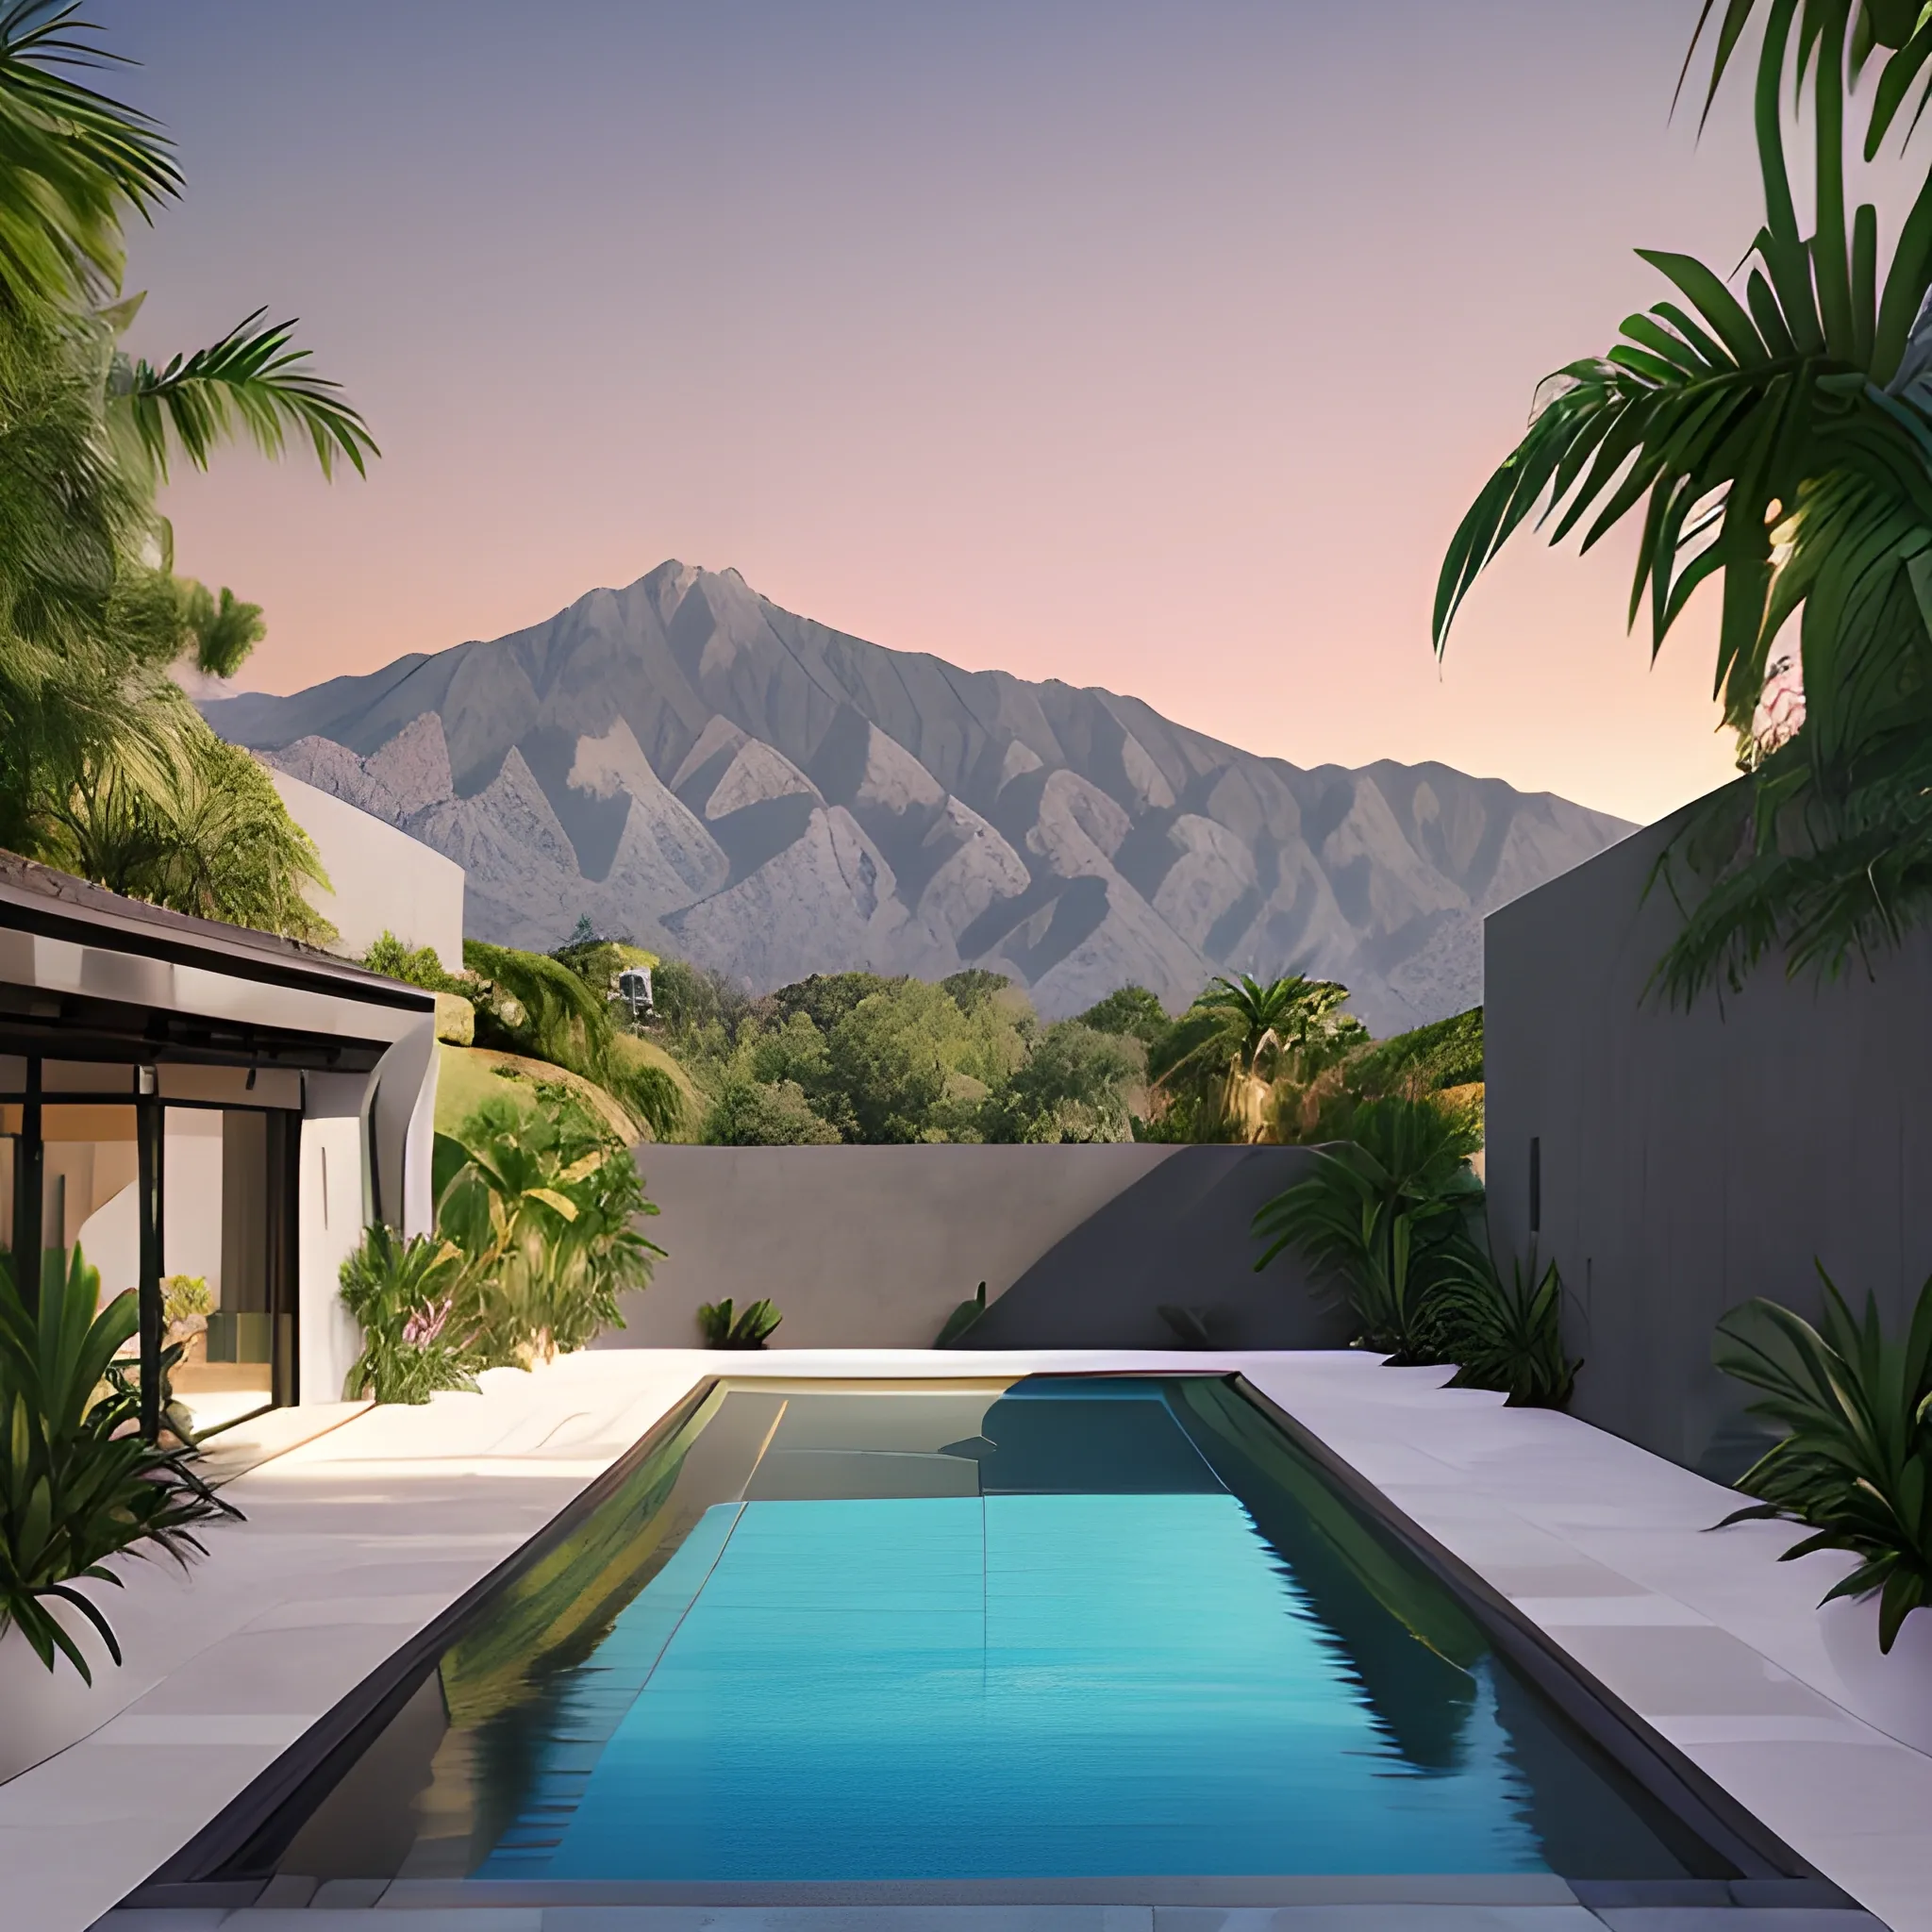 An infinity pool surrounded by dark grey wall on the right side looking out into the mount Canigou landscape from the pool. One palm tree in a jungle garden on the left. Golden hour with a pink hue. West Anderson style. Digital art.